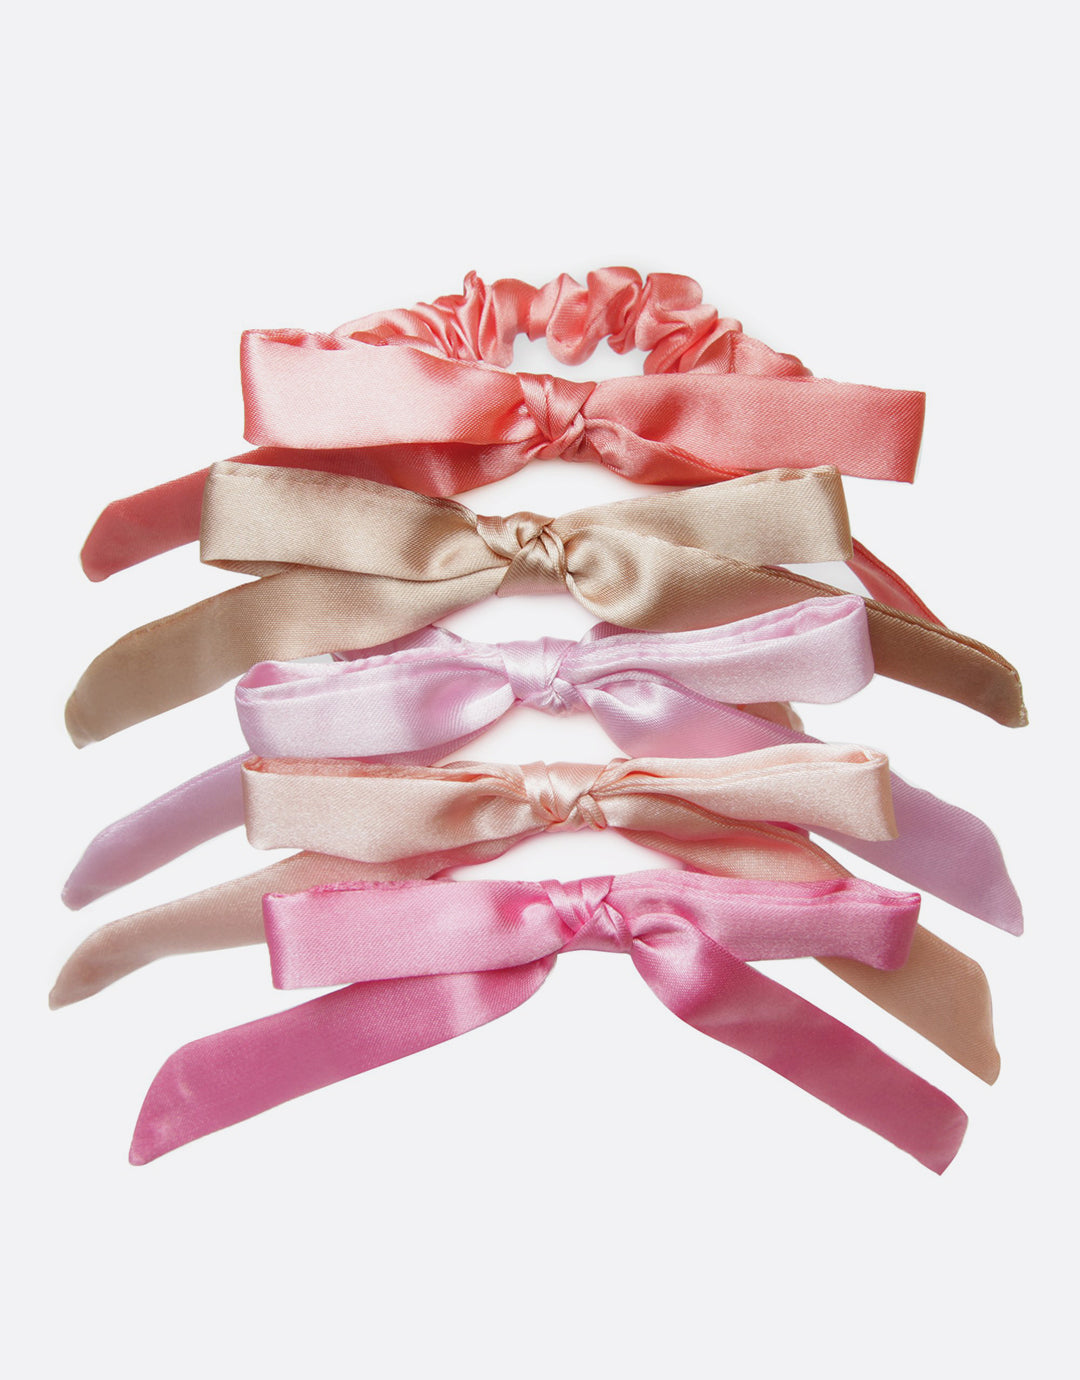 BANDED Women’s Premium Hair Accessories - Monet's Palette - 5 Pack Skinny Bow Scrunchies